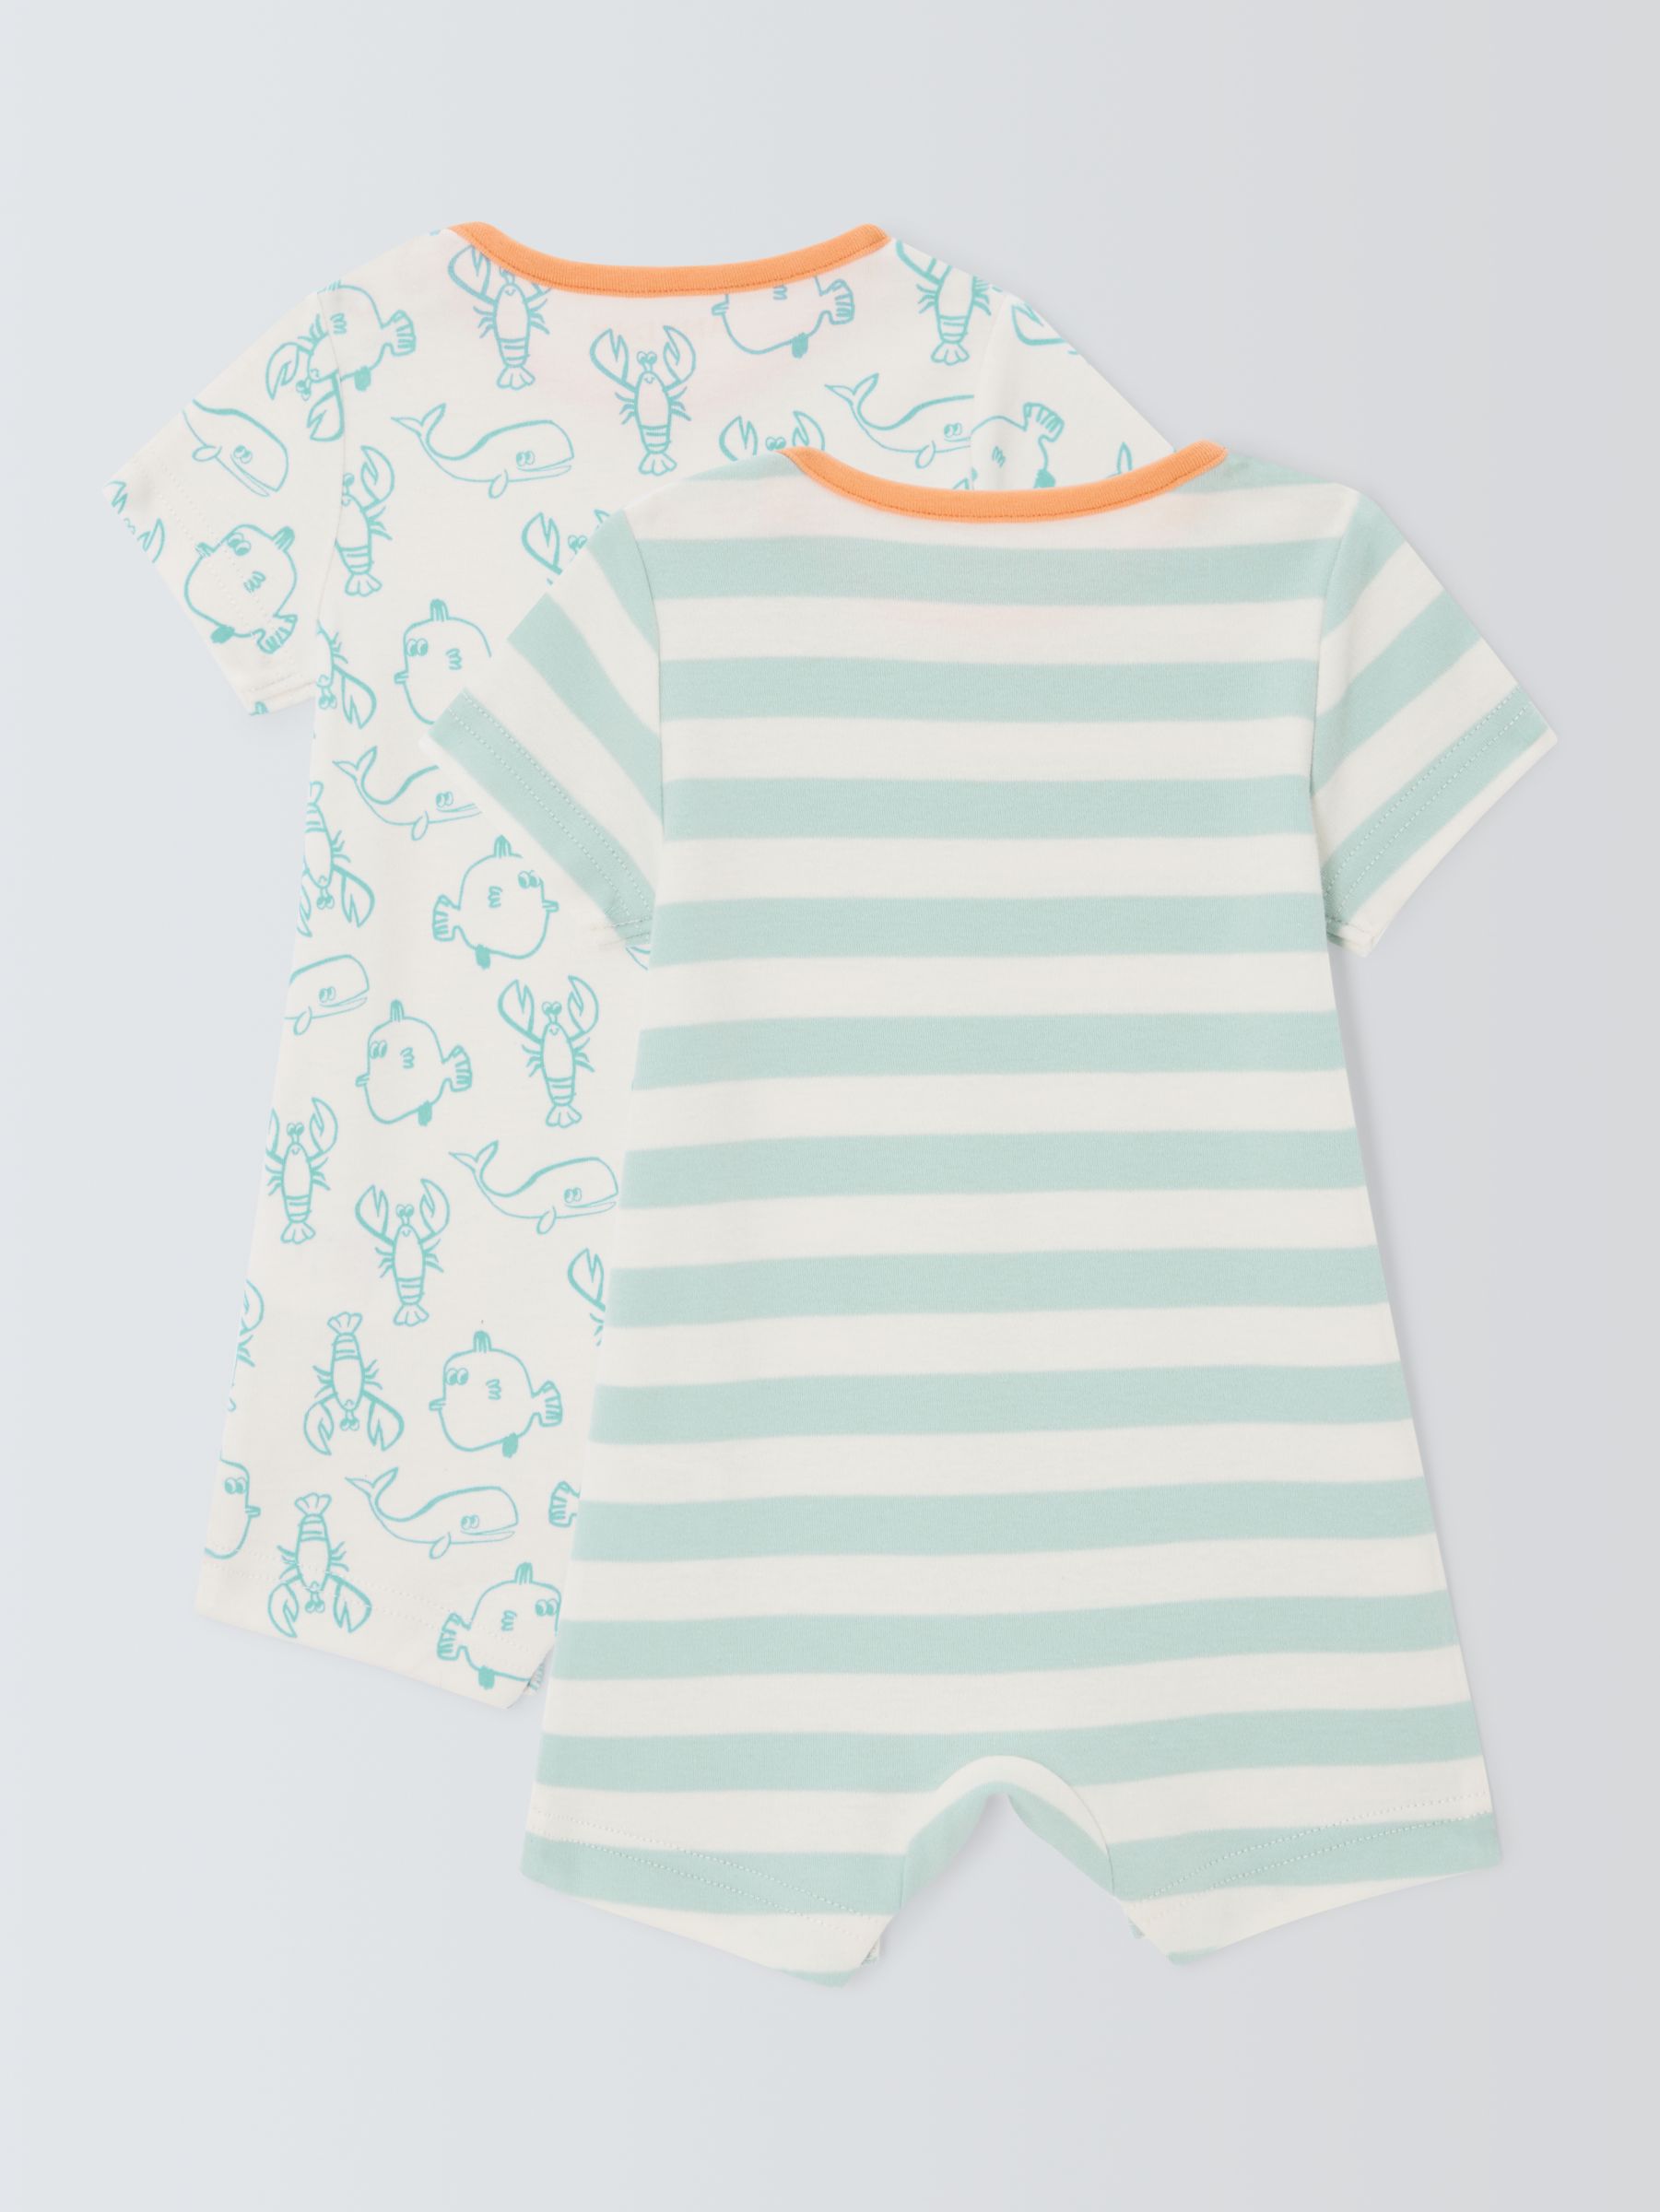 John Lewis ANYDAY Baby Stripe Lobster Romper, Pack of 2, Blue, 9-12 months